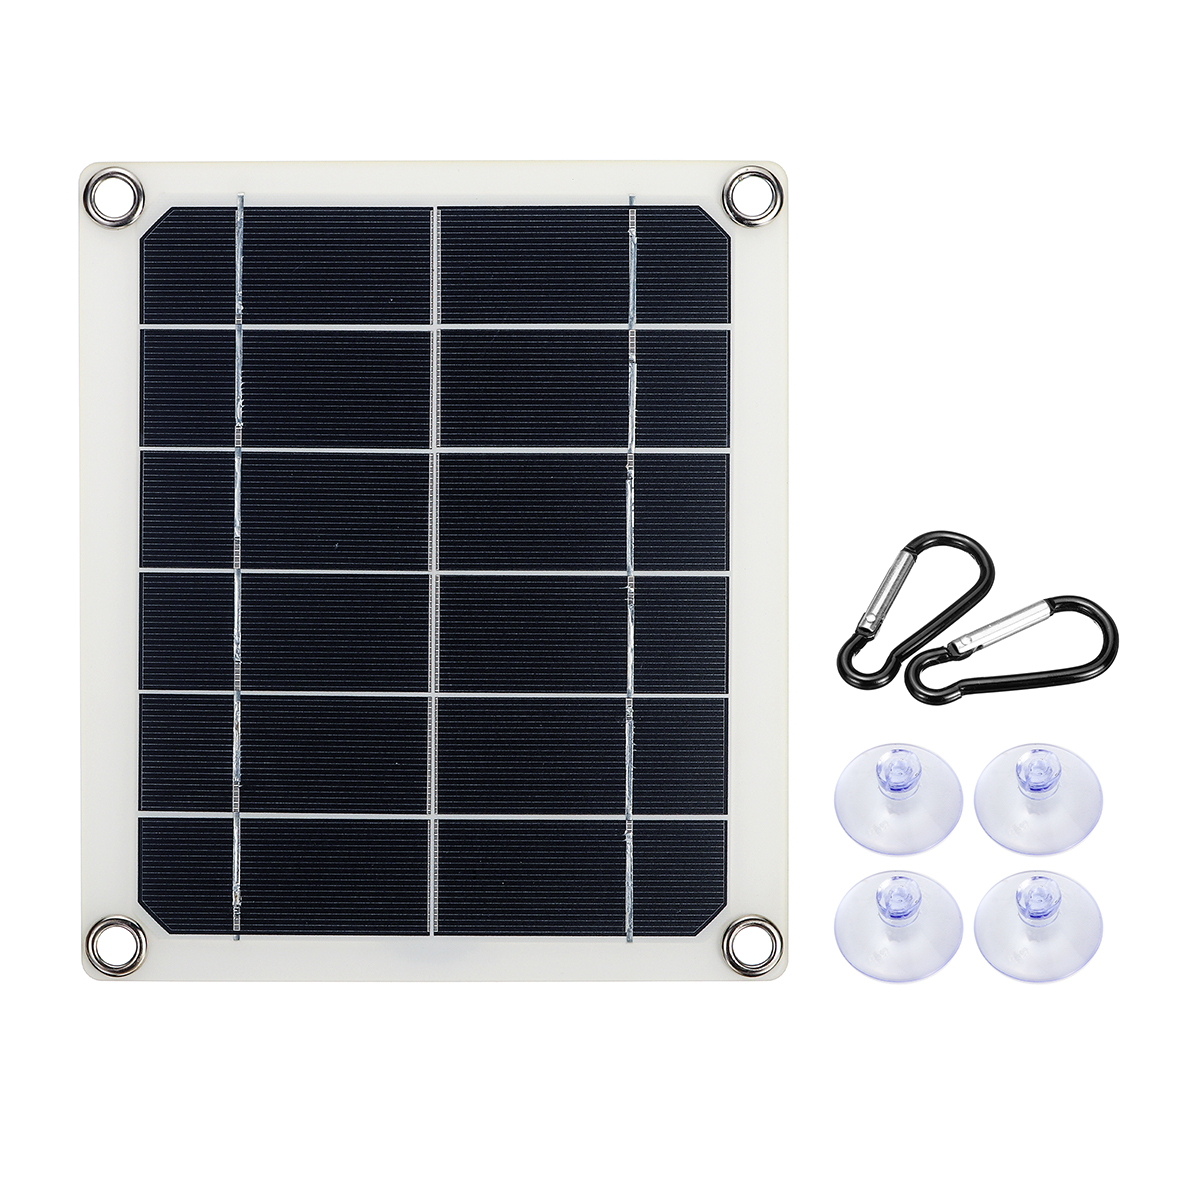 

5W 5V Semi-Flexible Monocrystalline Solar Panel with Junction Box Dual USB Charger + 4xSucker + 2xCarabiner Kit for Outdoor Charger